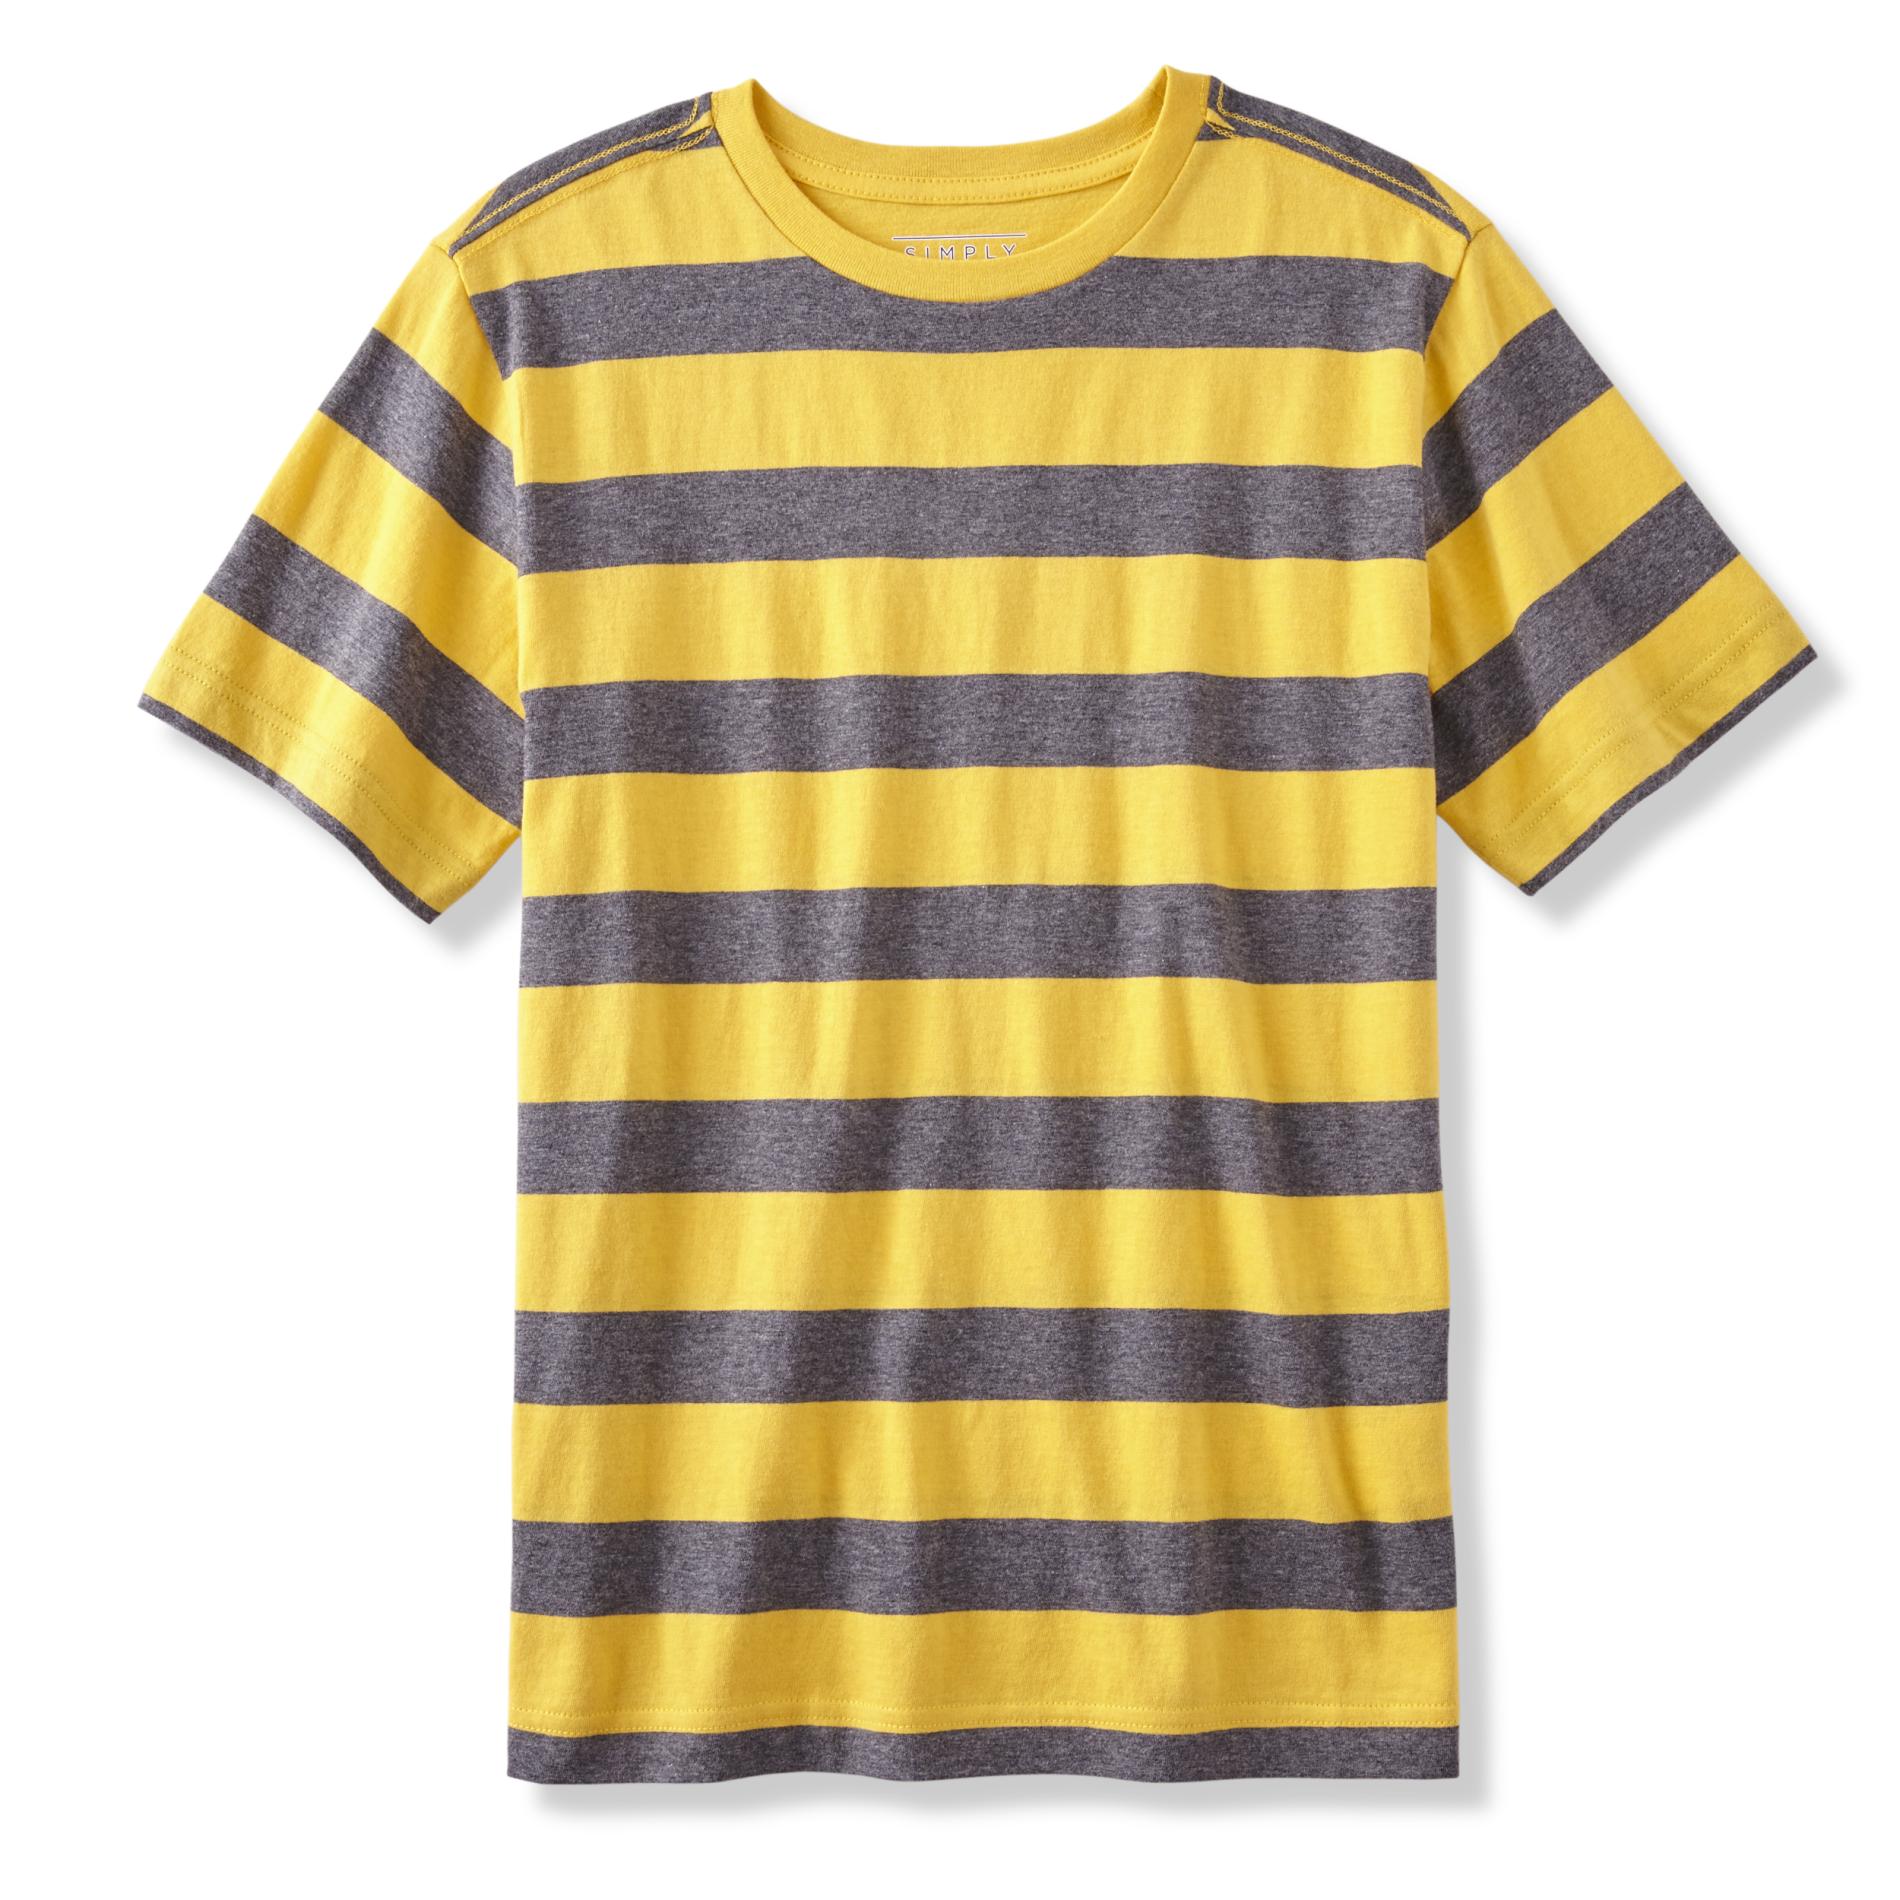 Simply Styled Boys' T-Shirt - Striped